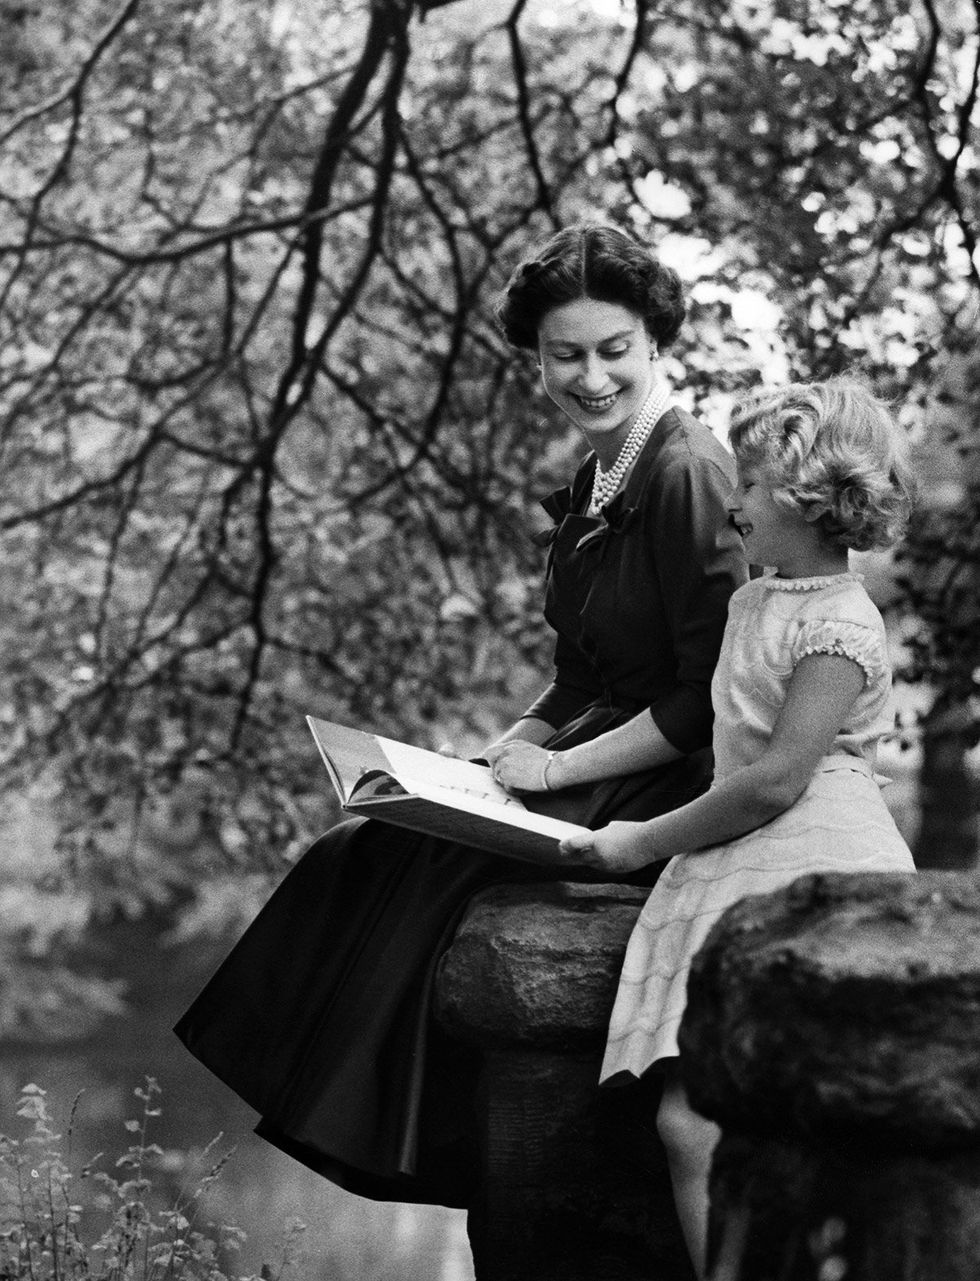 Photograph, Black-and-white, Sitting, Monochrome photography, Monochrome, Photography, Tree, Dress, Stock photography, Reading, 